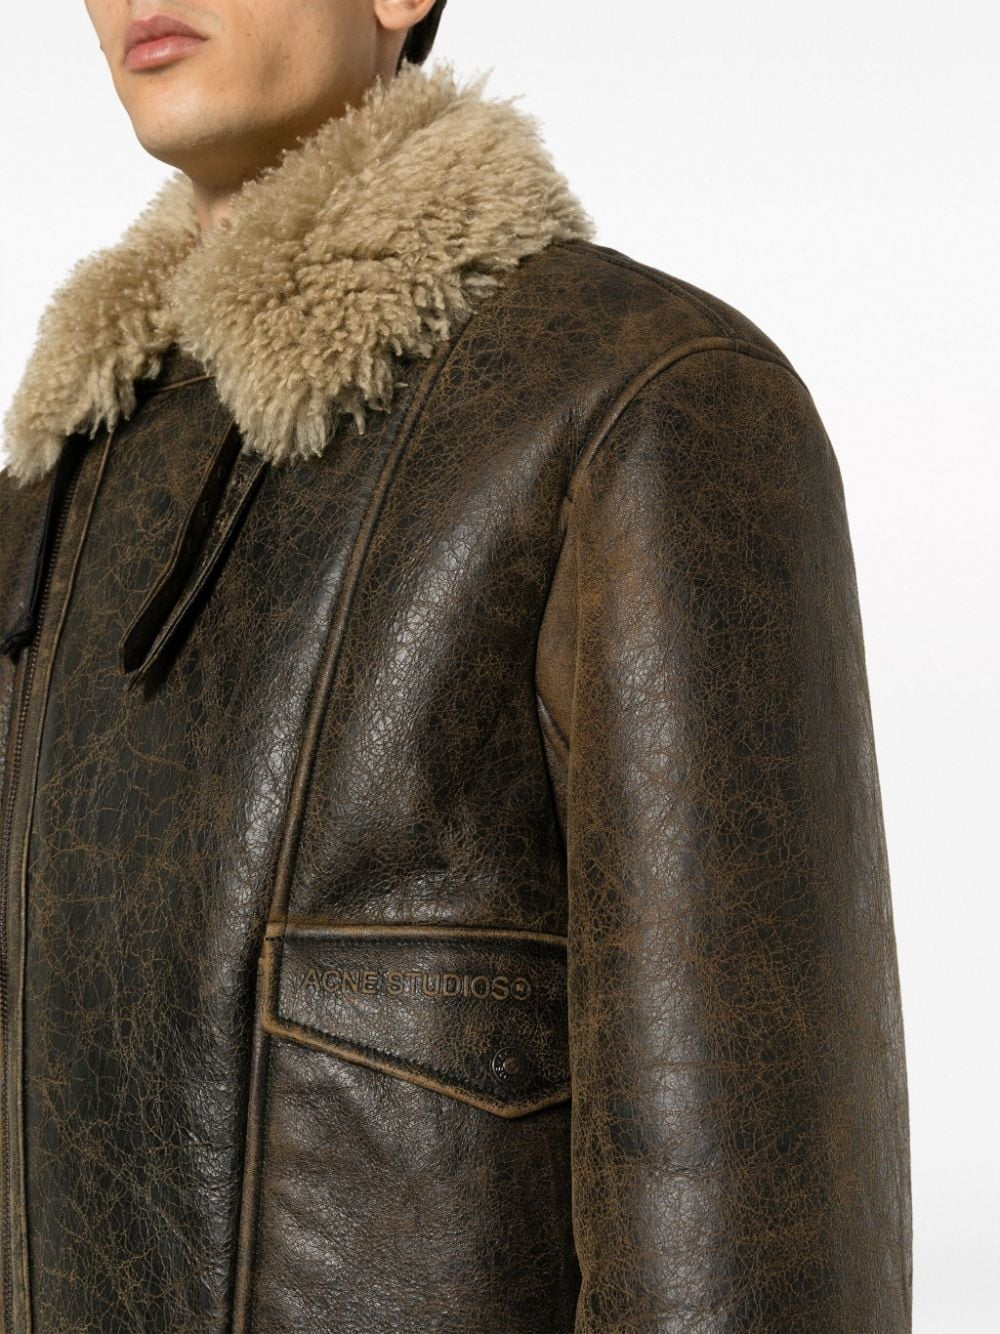 ACNE STUDIOS-LEATHER OUTERWEAR-B70128 AFQ